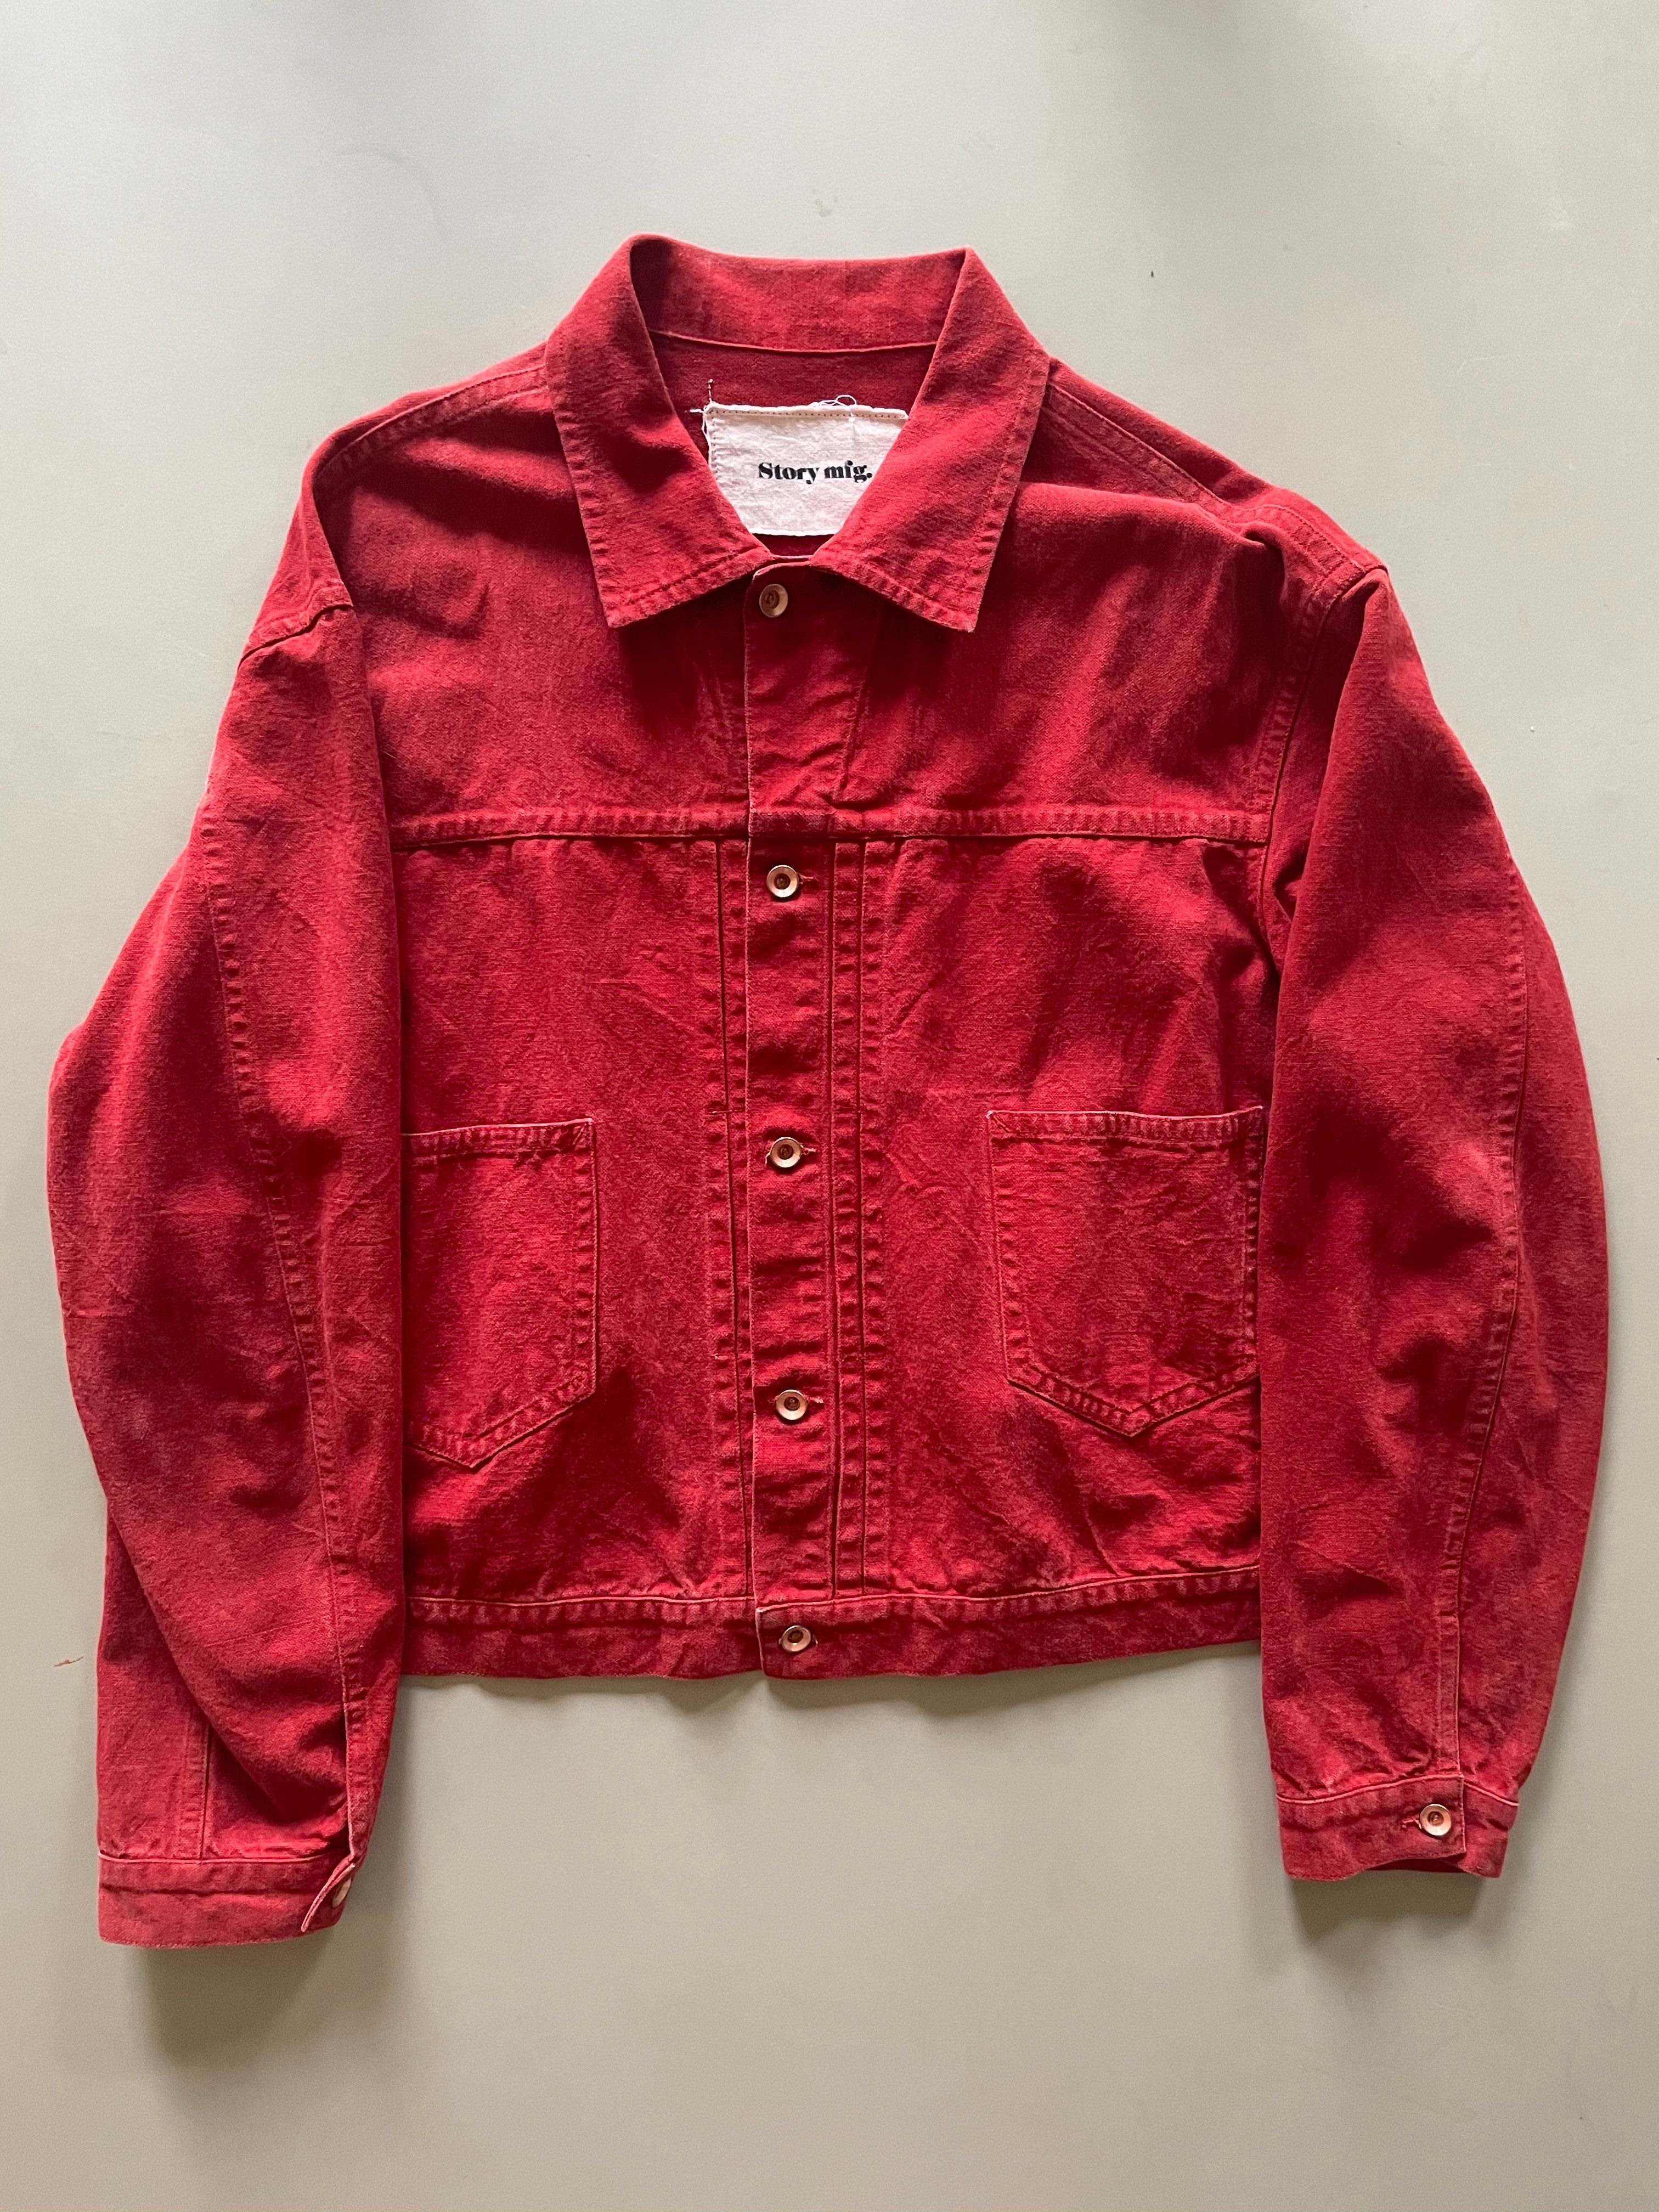 Story Mfg. RARE - Sundae Jacket in Red Madder Dyed Organic Canvas | Grailed